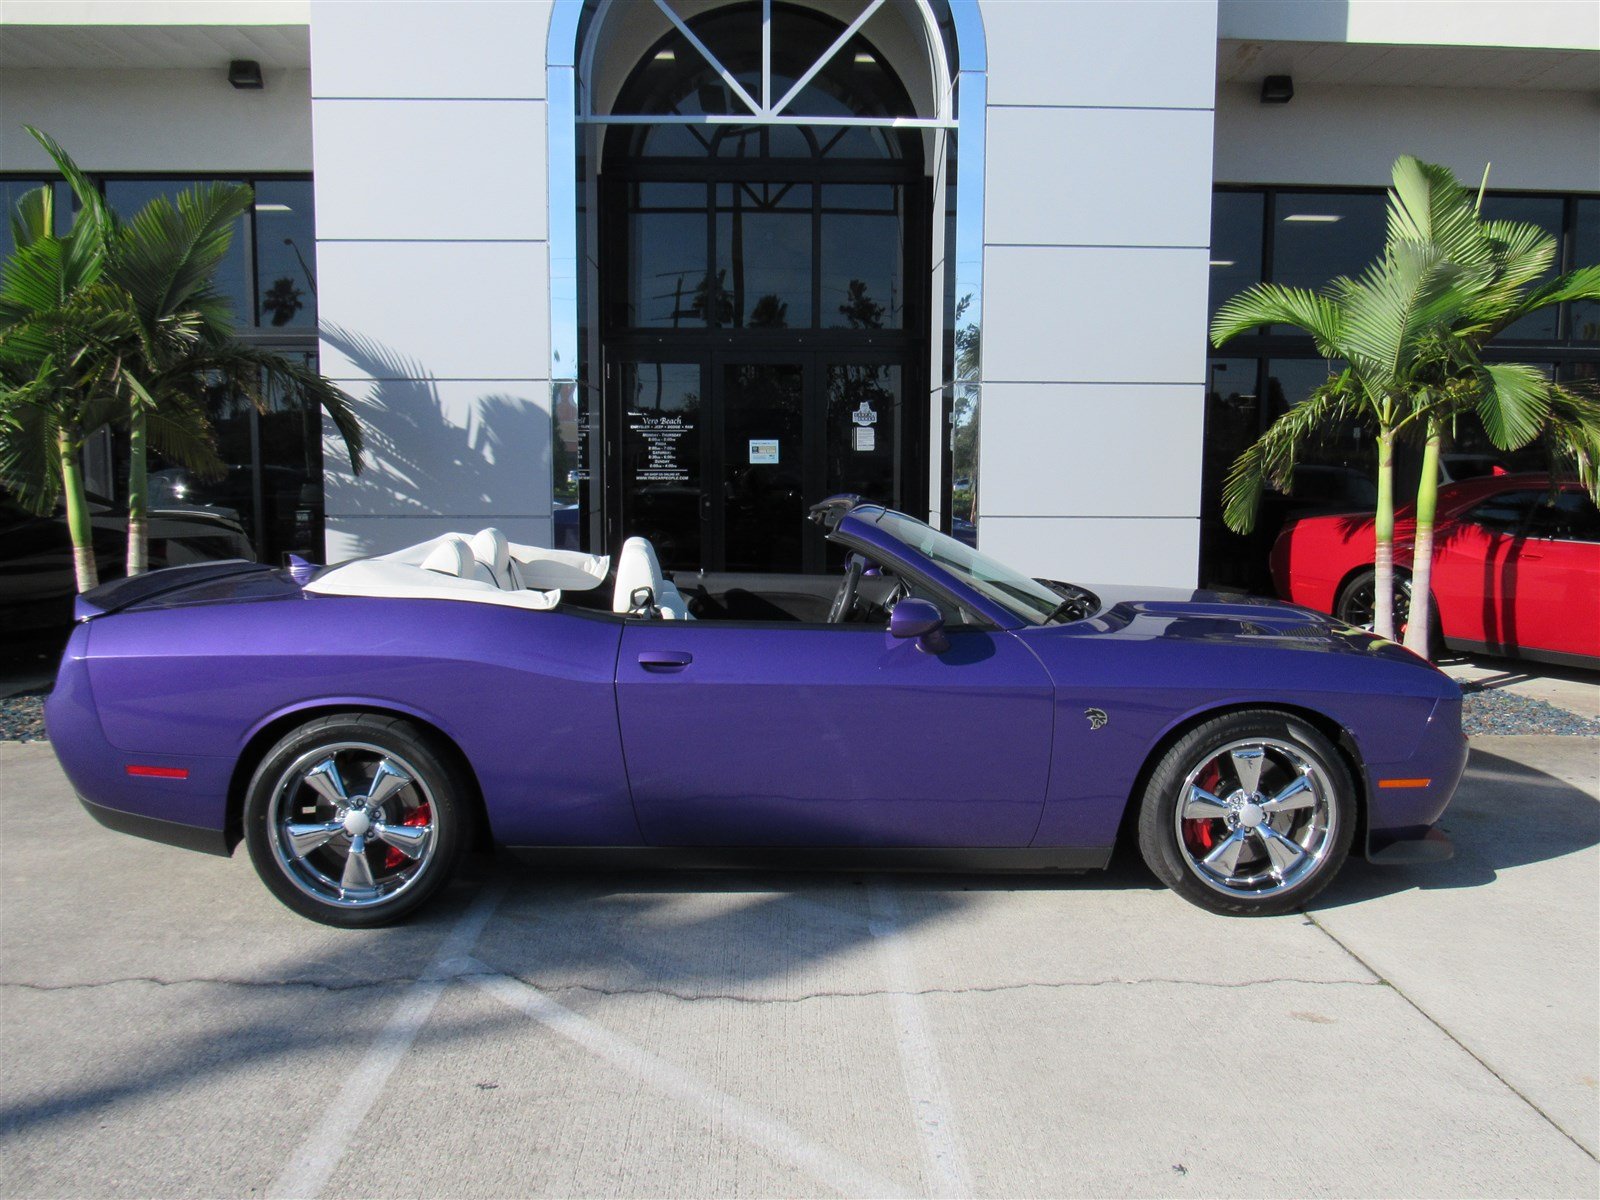 Are You Plum Crazy Enough To Spend 90k On A Challenger Hellcat